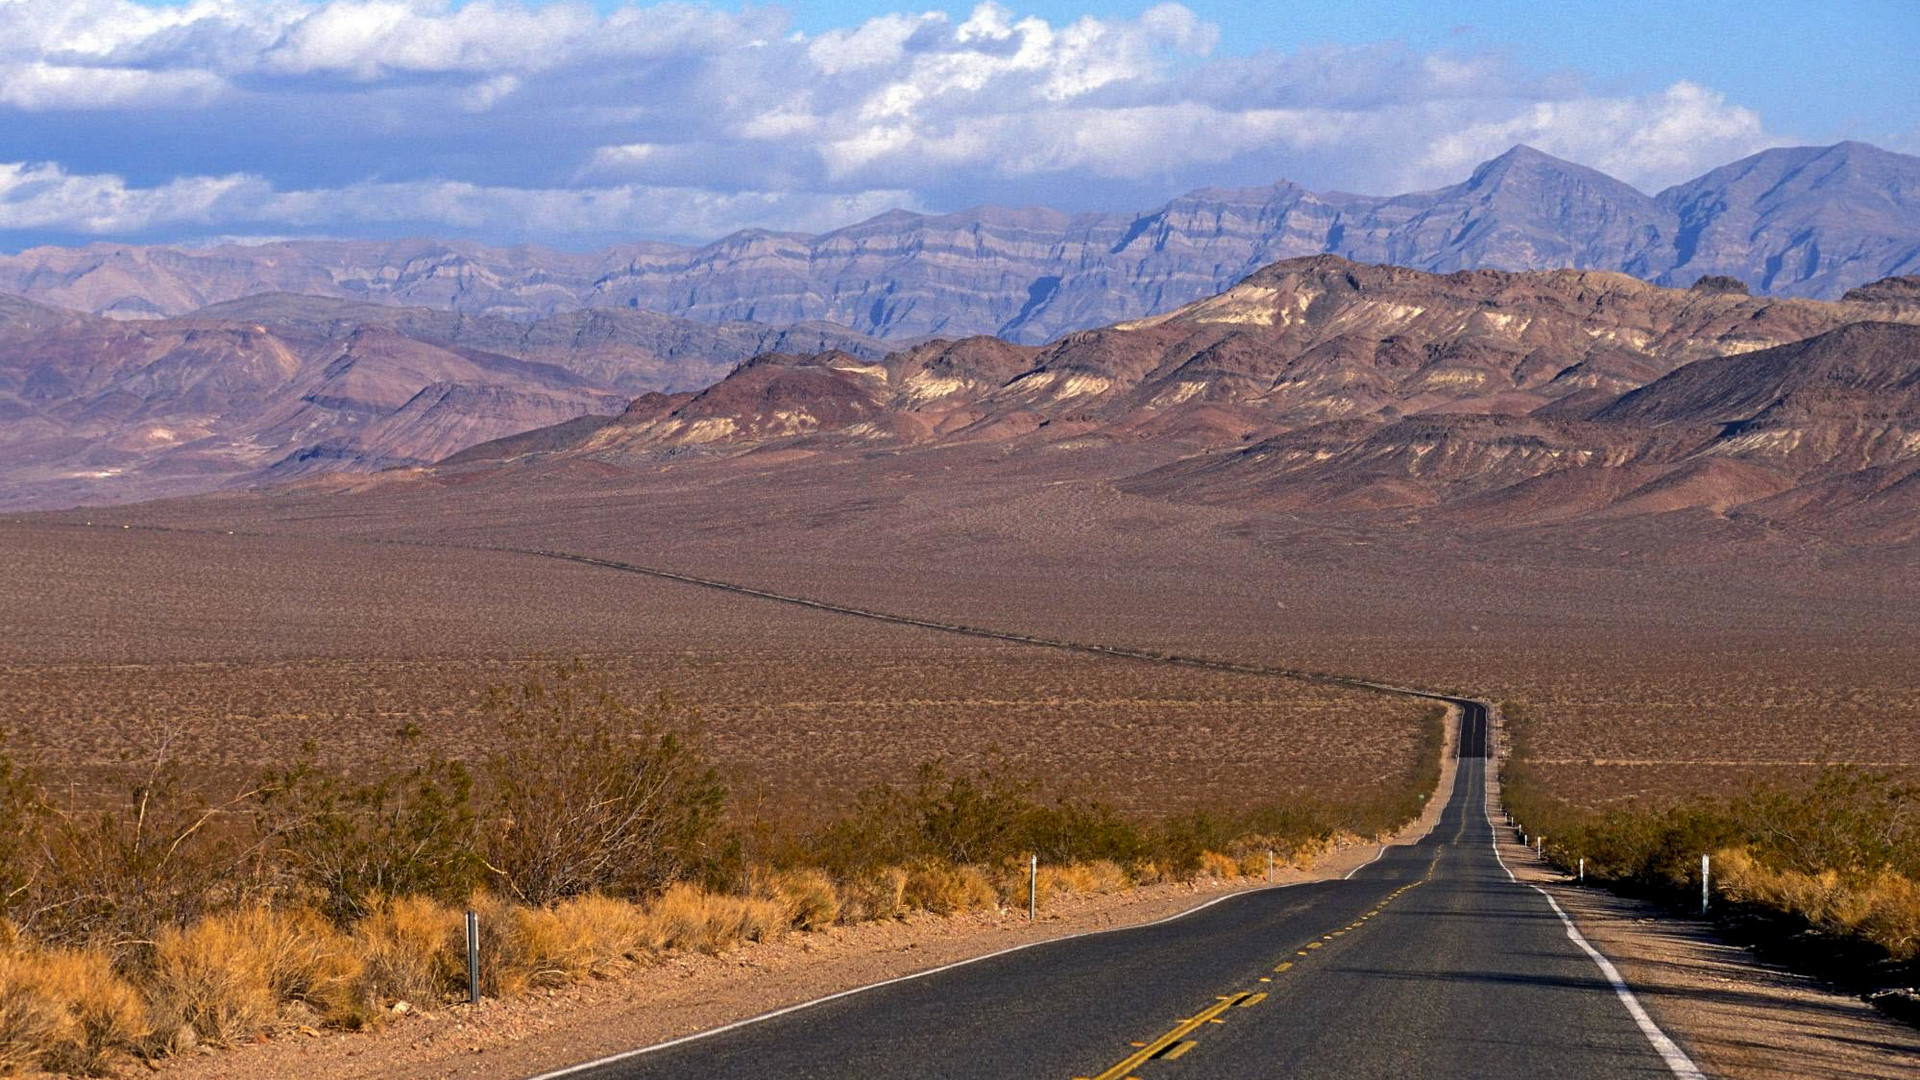 Lonely Road to Shoshone, Death Valley National Park, CA.jpg